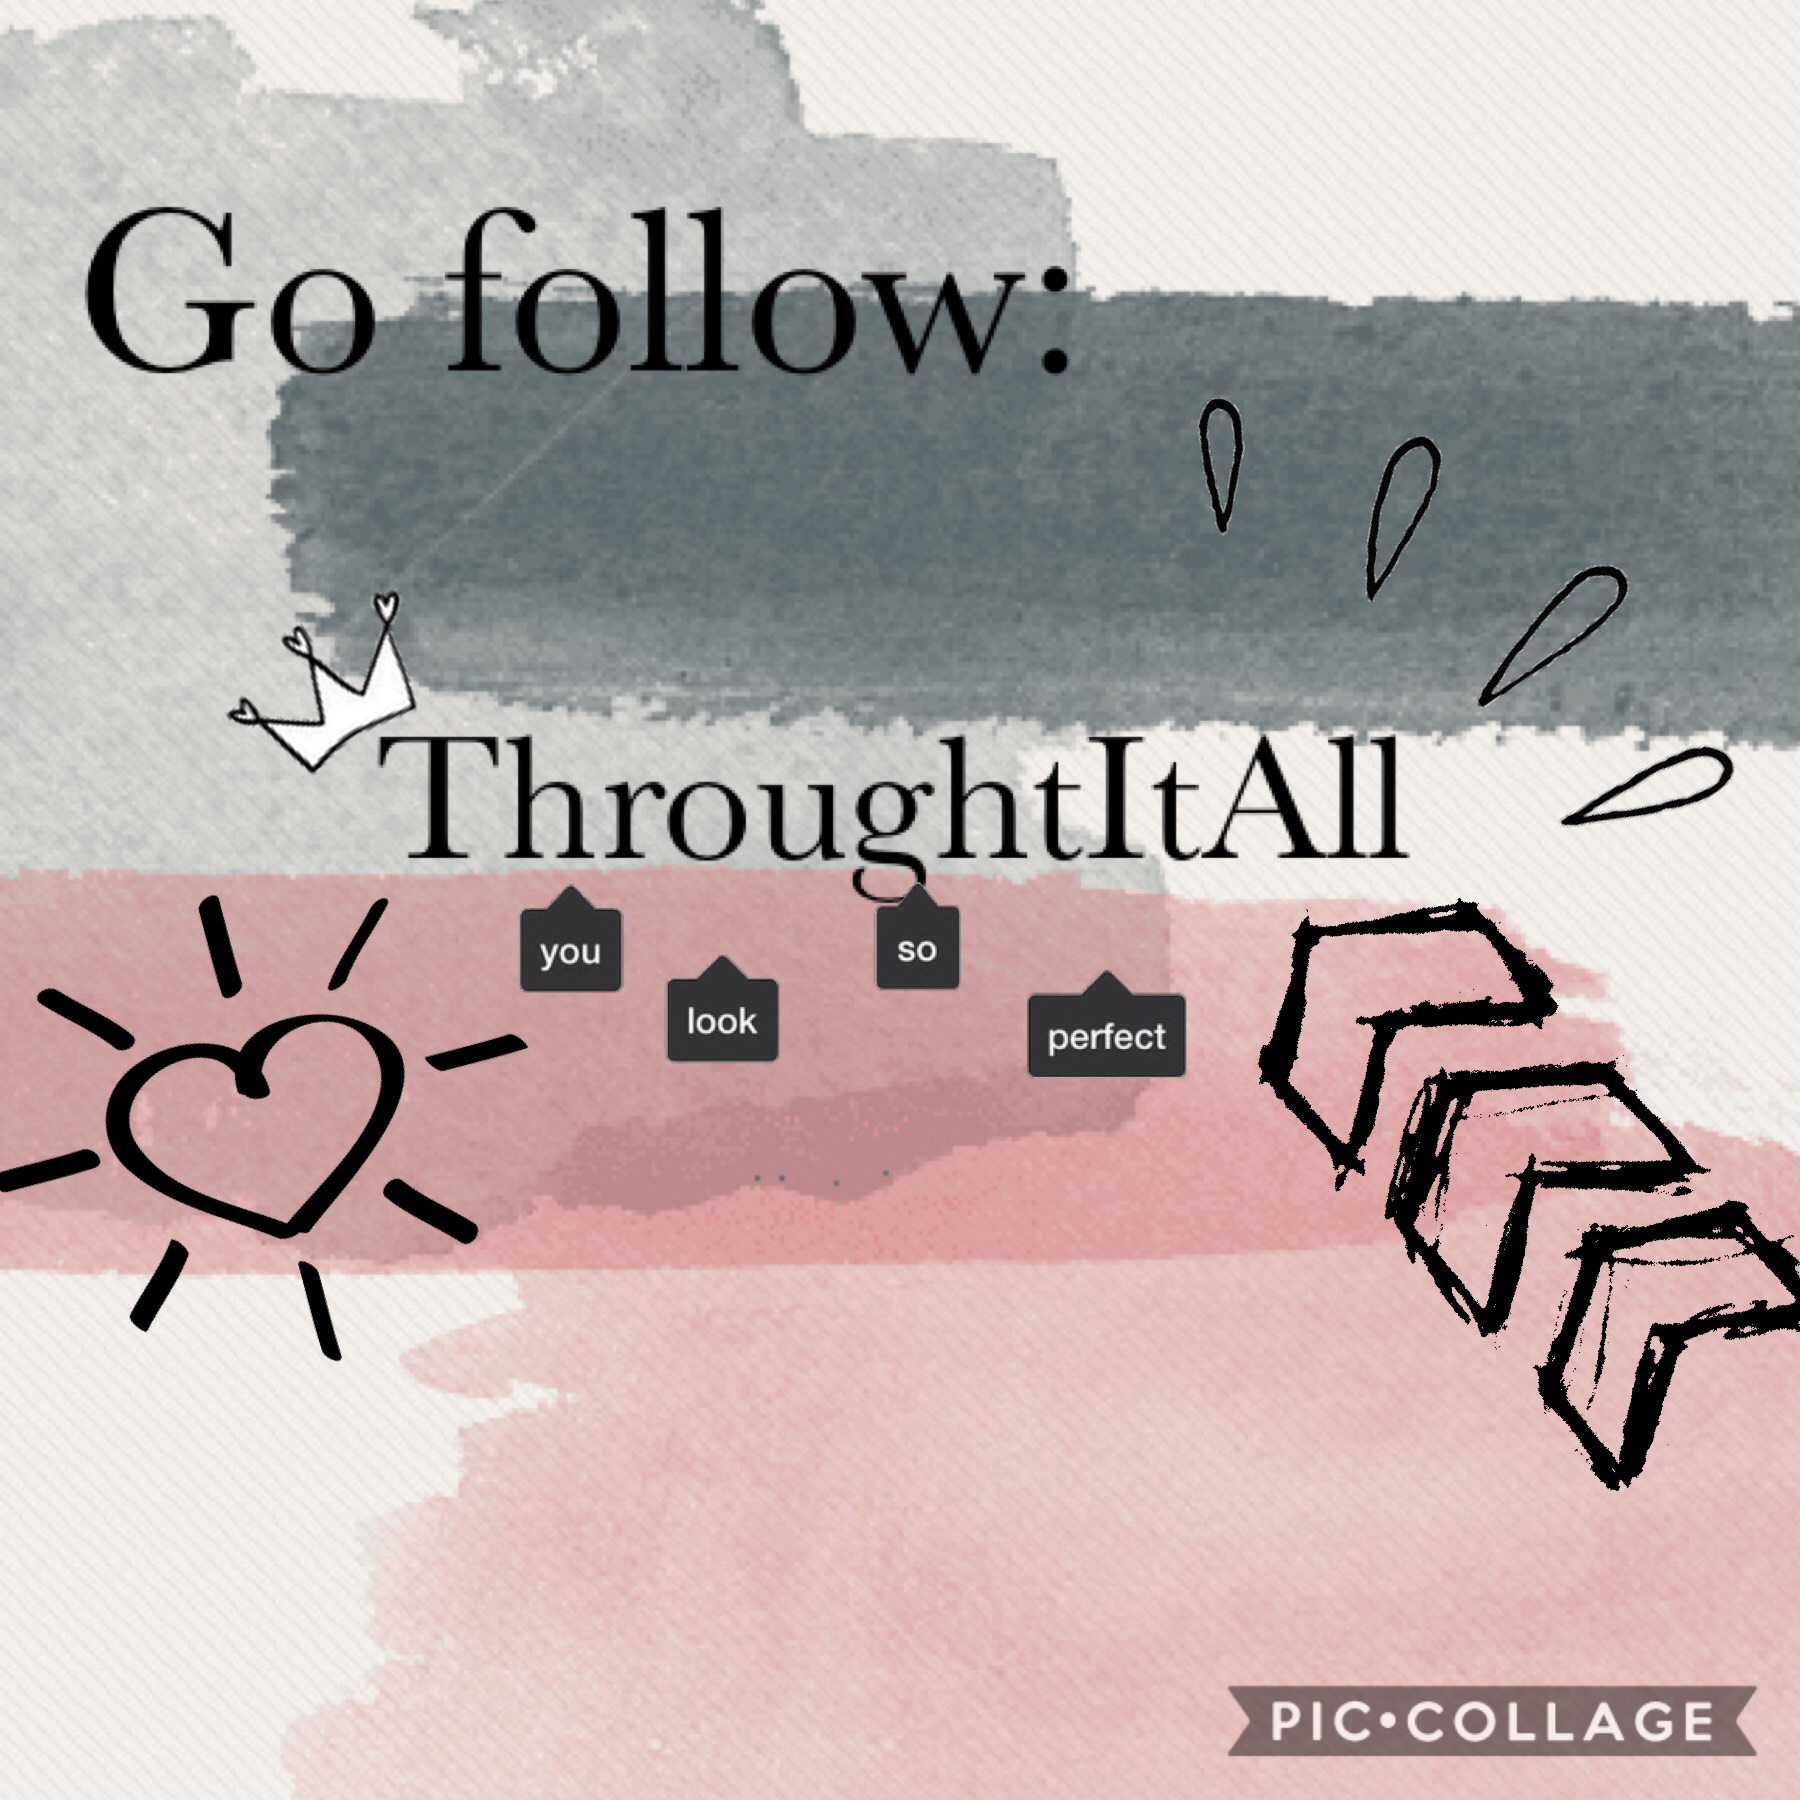 Thank throughItAll for being my 30th follower!!!!